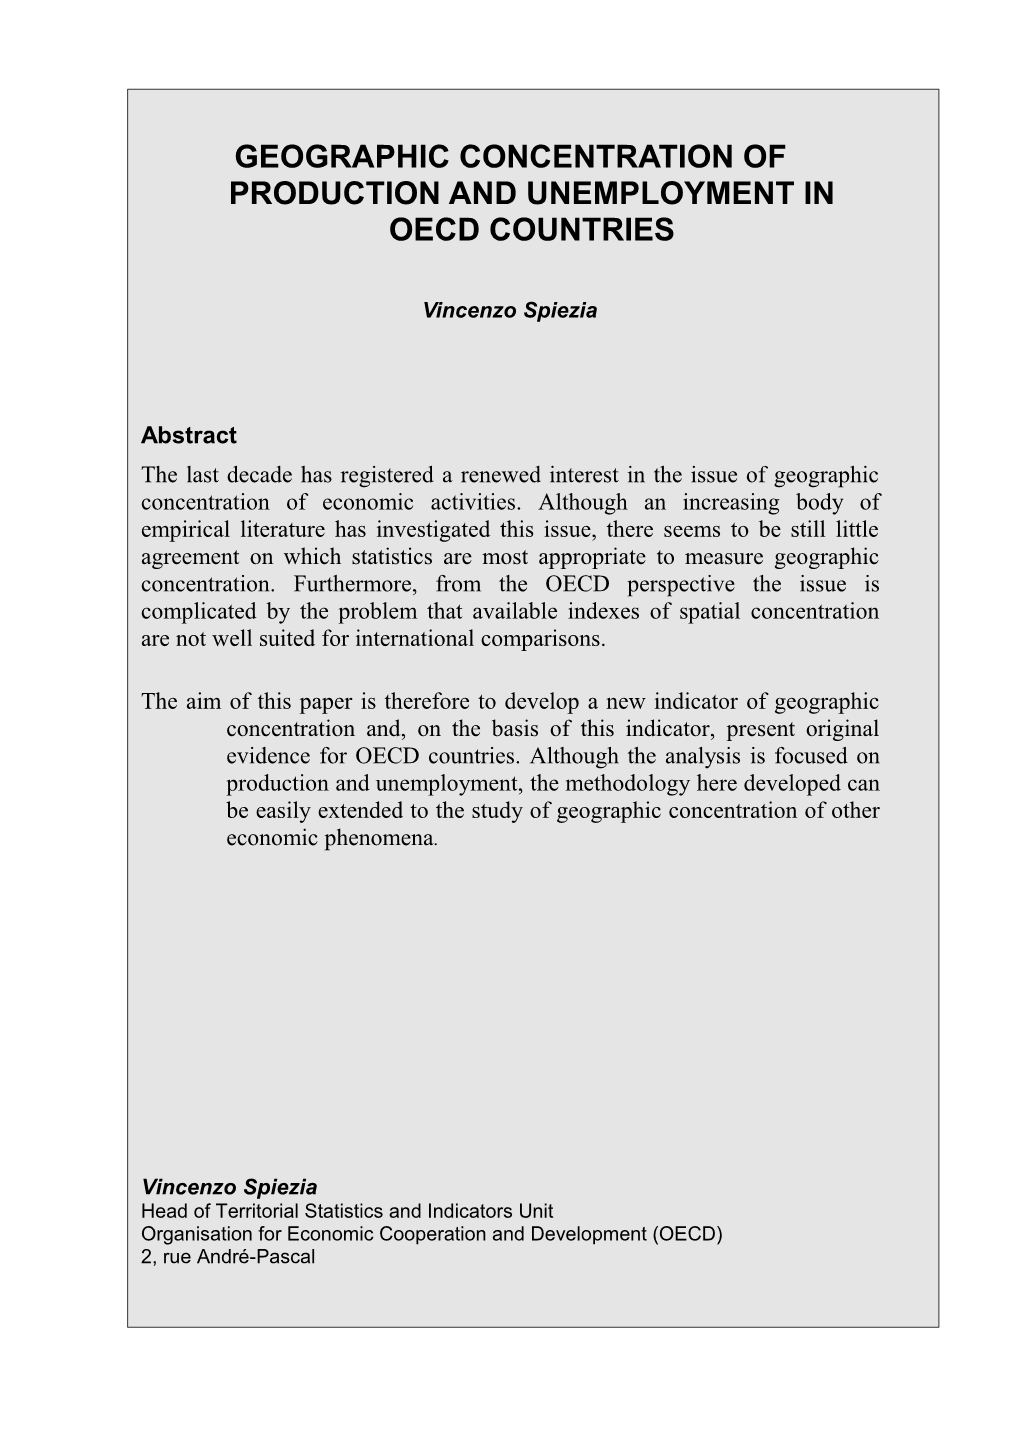 Geographic Concentration and Territorial Disparity in OECD Countries